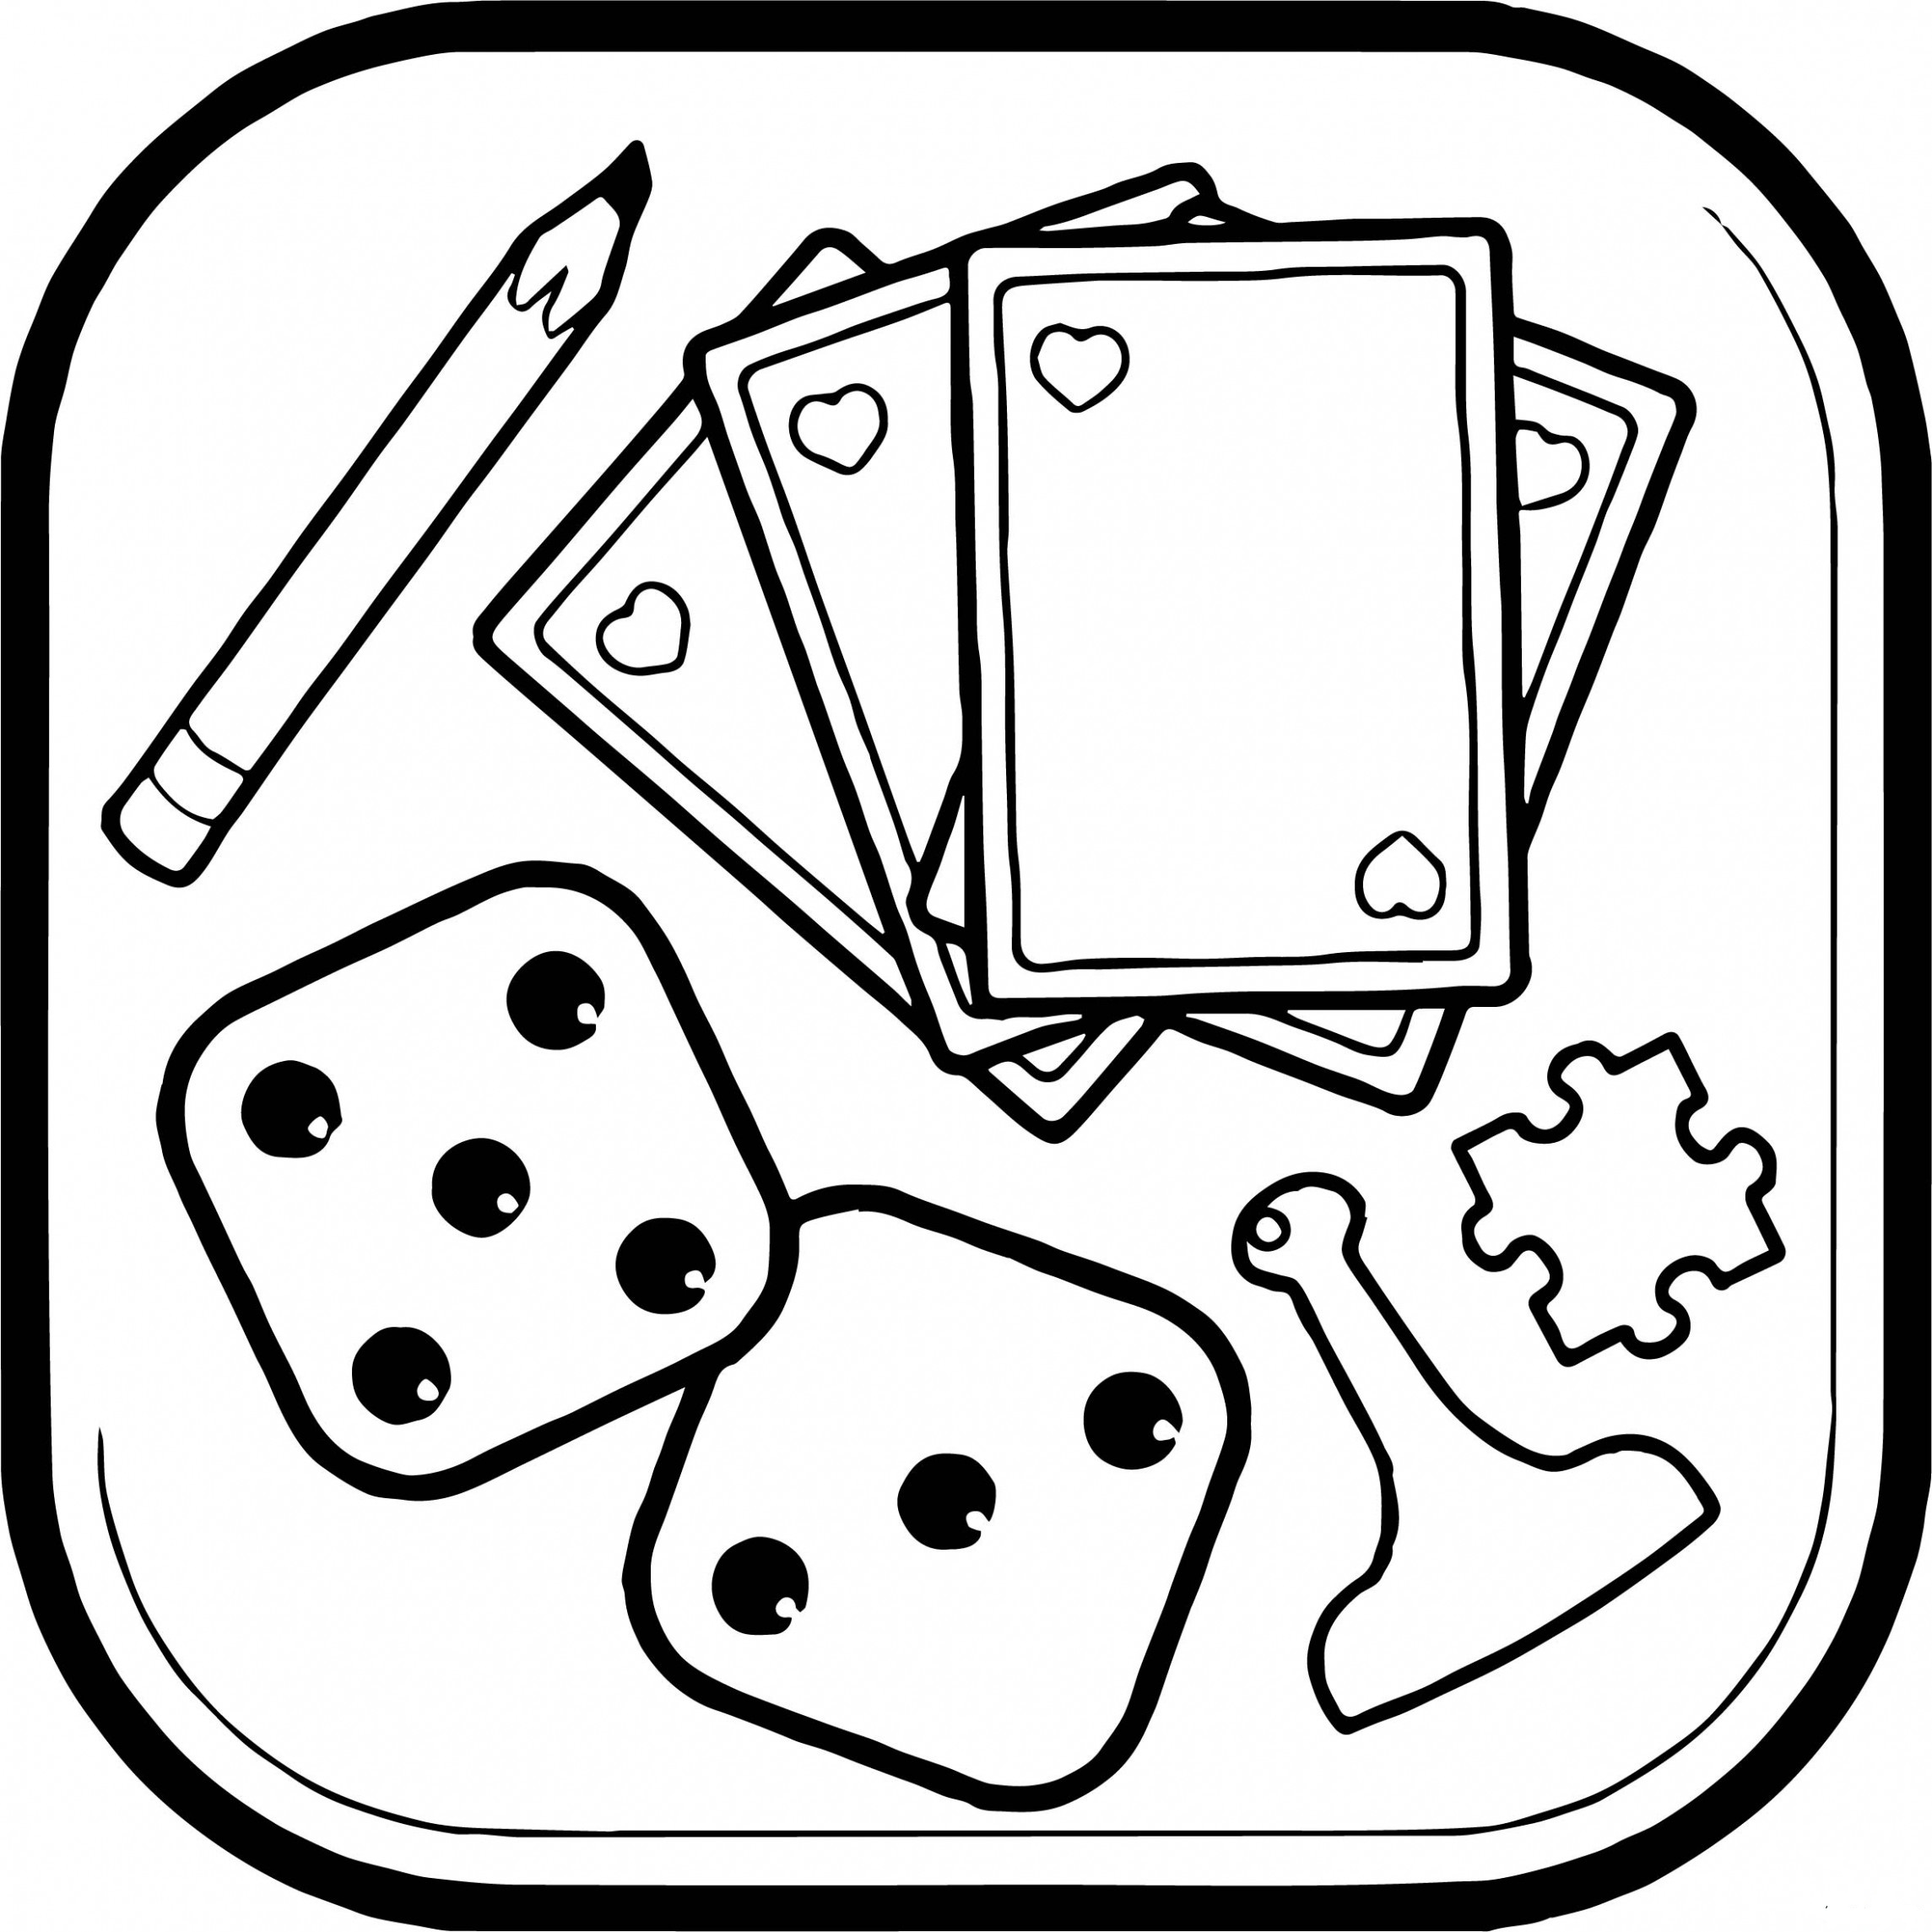 Dice Video Game Coloring Pages   Coloring Cool